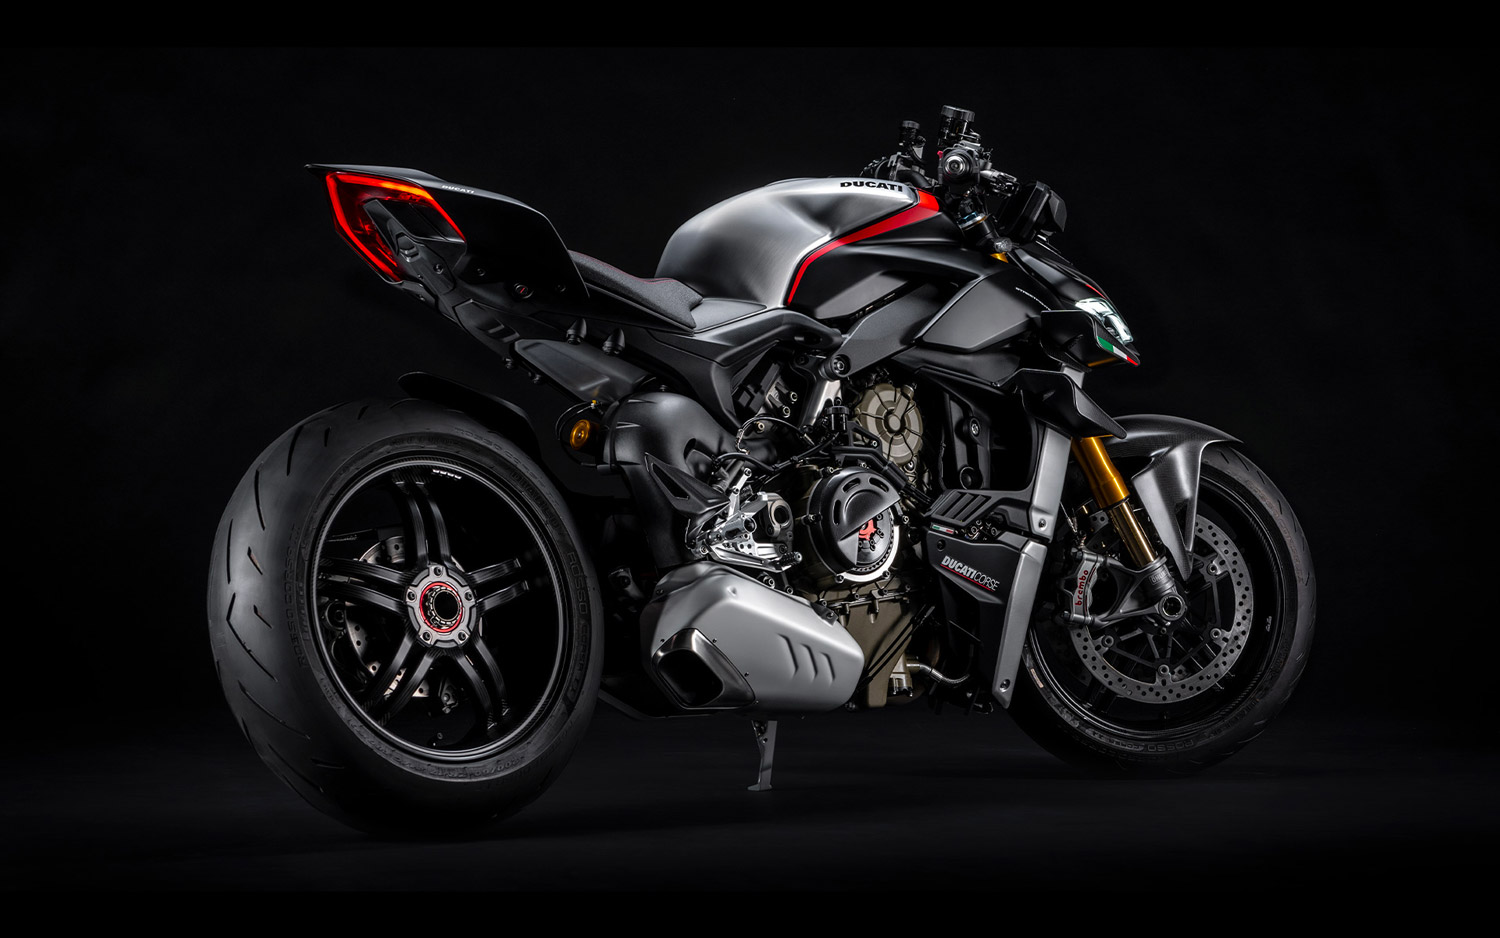 A Ducati Streetfighter V4 SP motorcycle from 2023